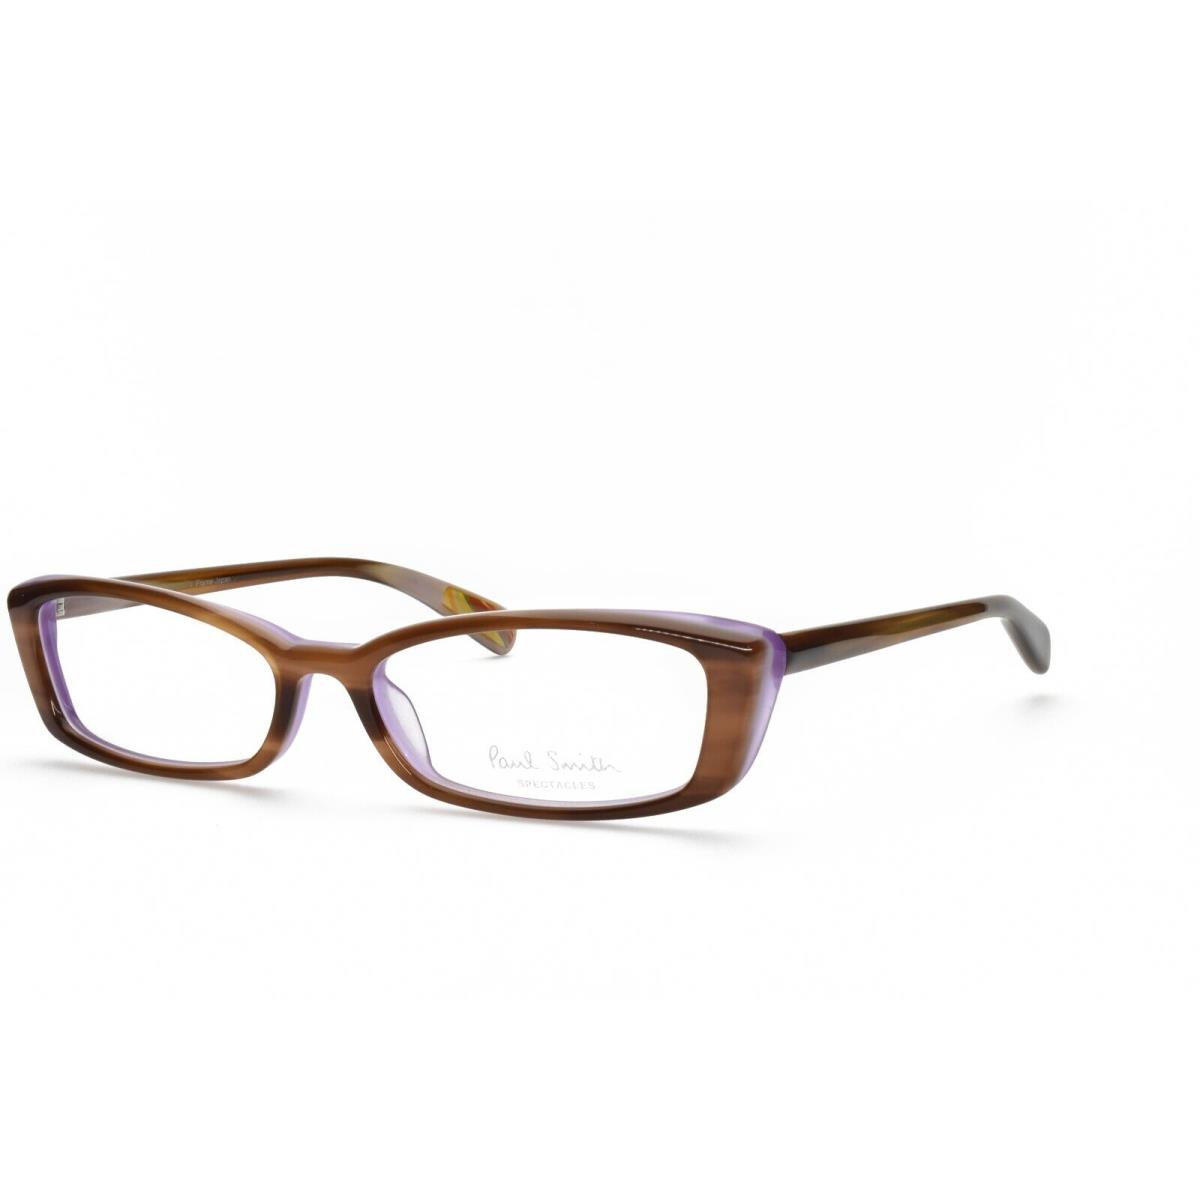 Paul Smith PS 406 Syclv Eyeglasses Frames Only 52-16-138